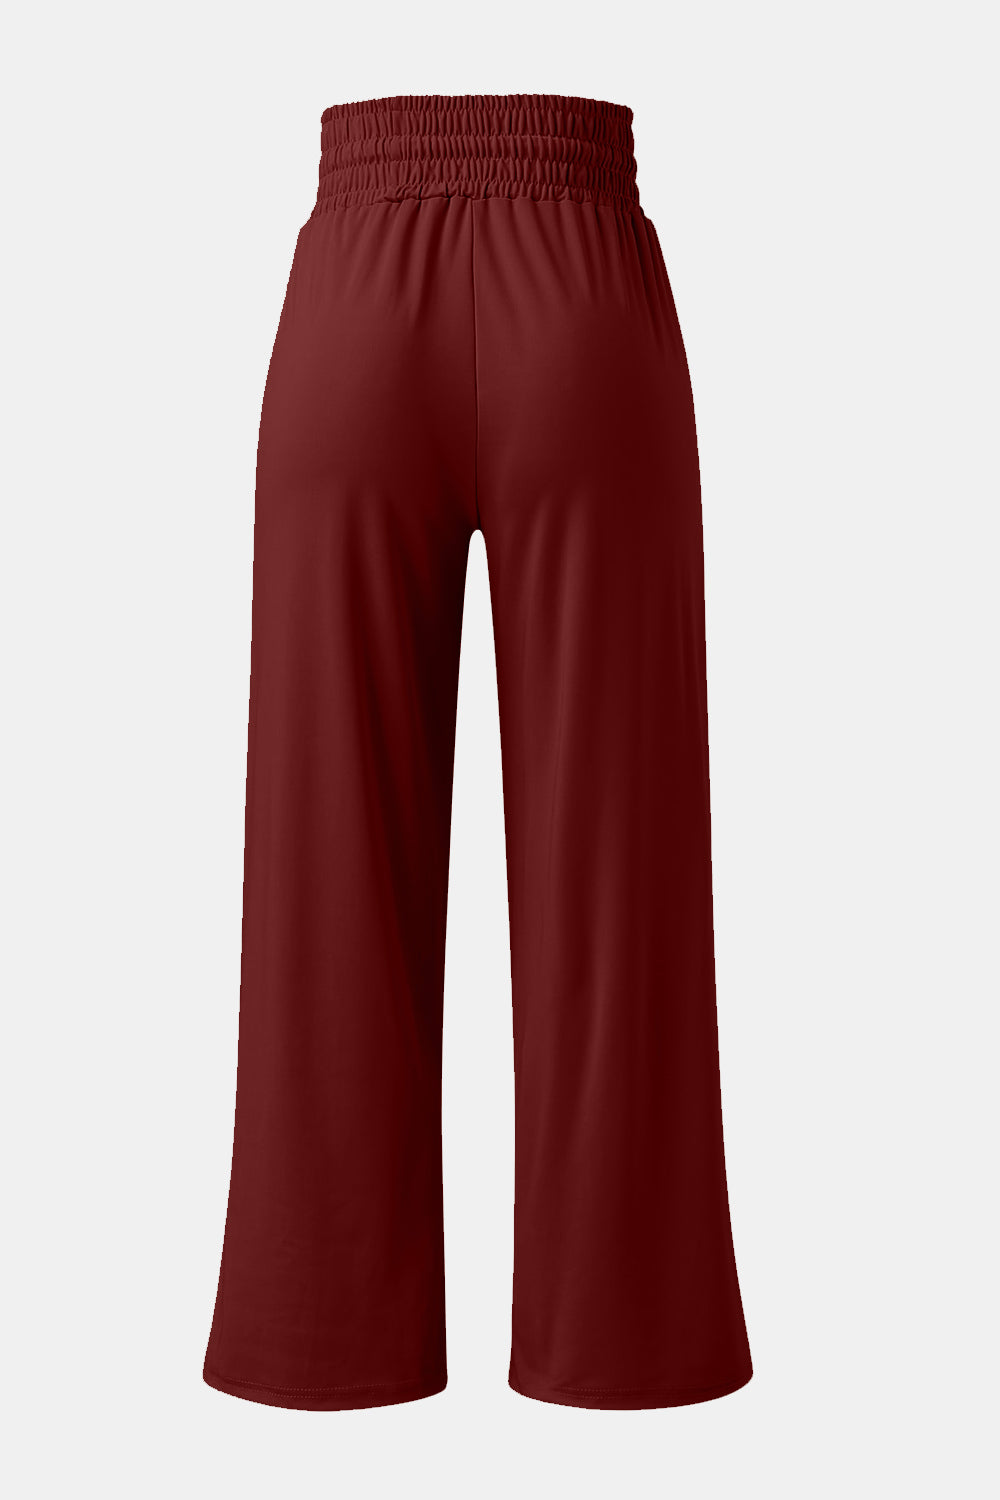 Comfortable wide-leg pants for women in six color options.